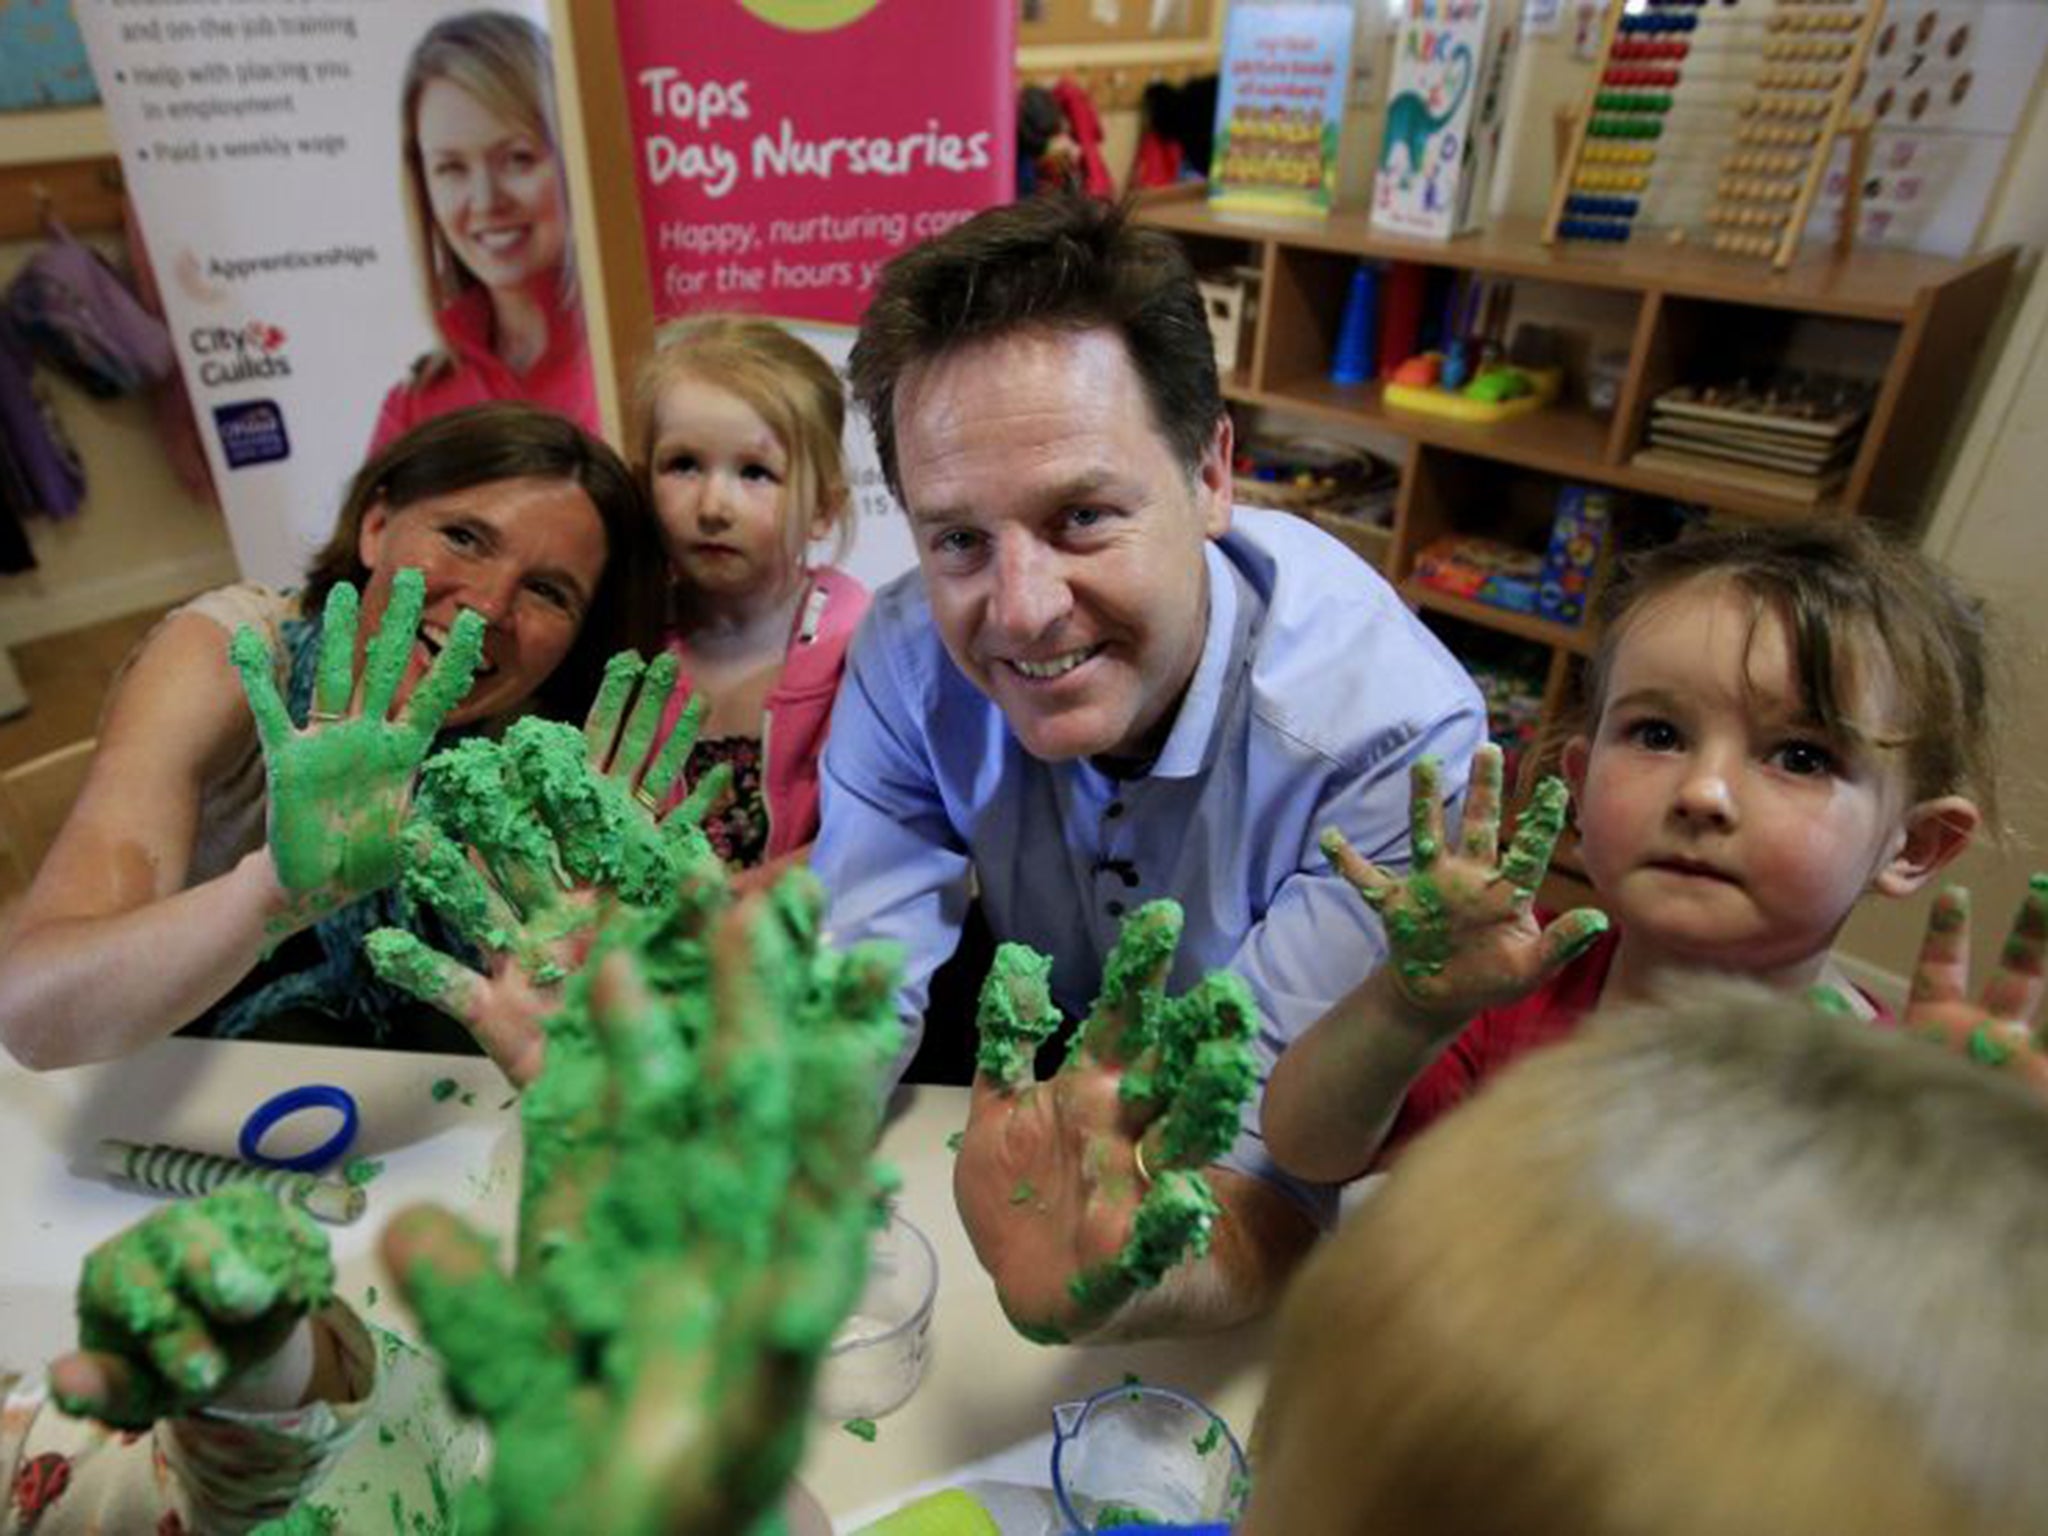 Nick Clegg was campaigning with candidate Vikki Slade at a nursery in Dorset on Monday